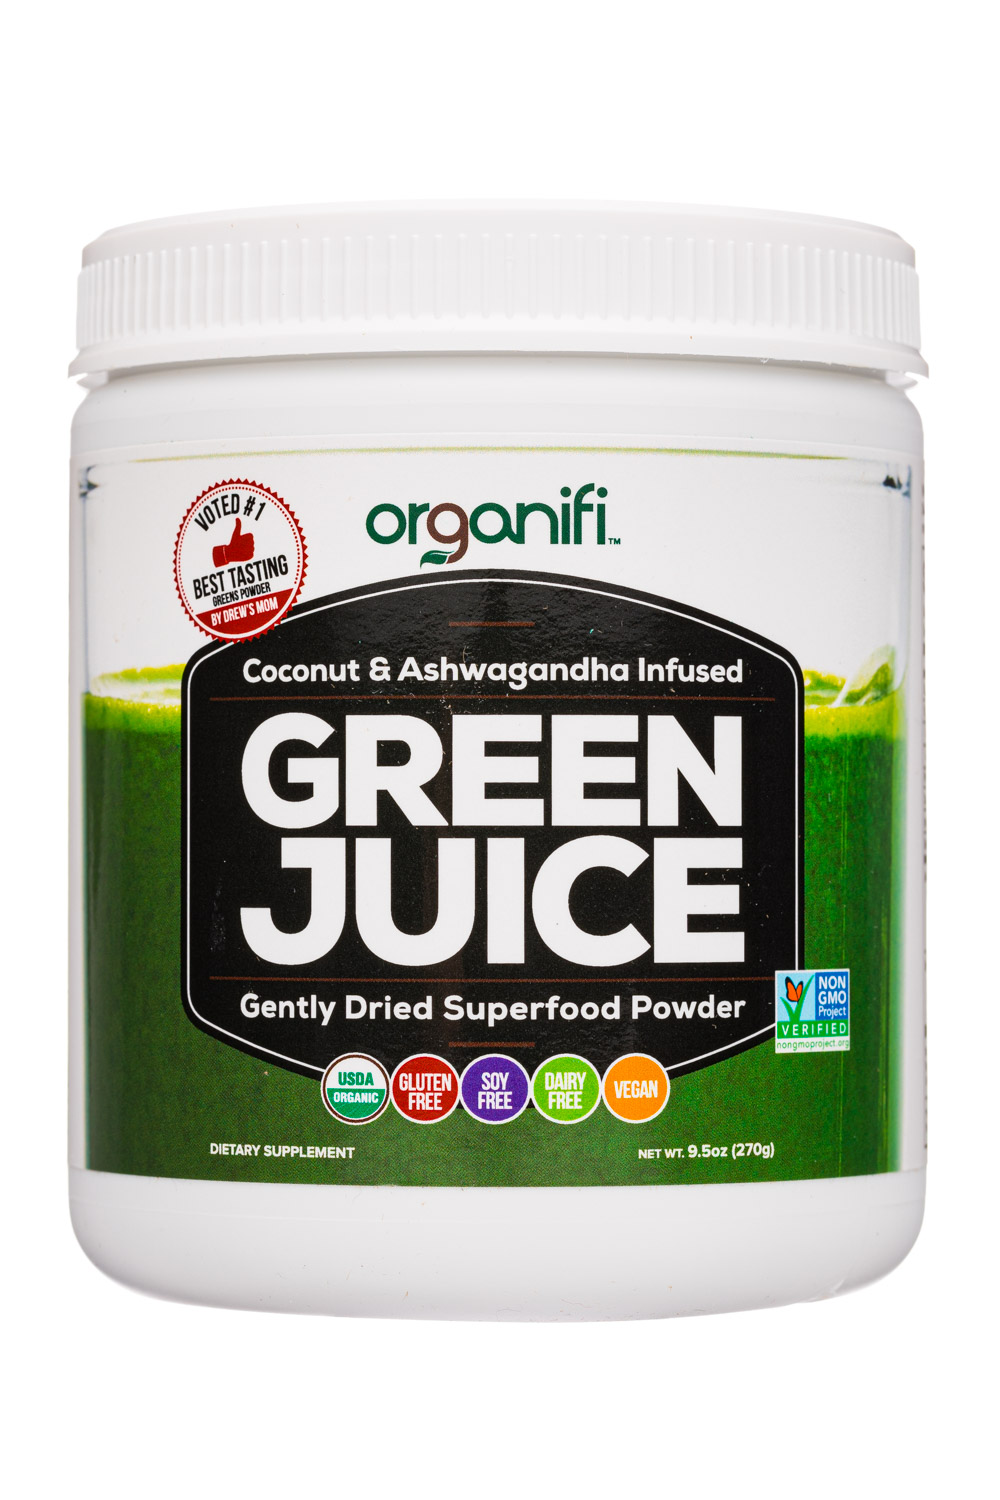 Getting The Organifi Green Juice - Dr. Mindy Pelz To Work